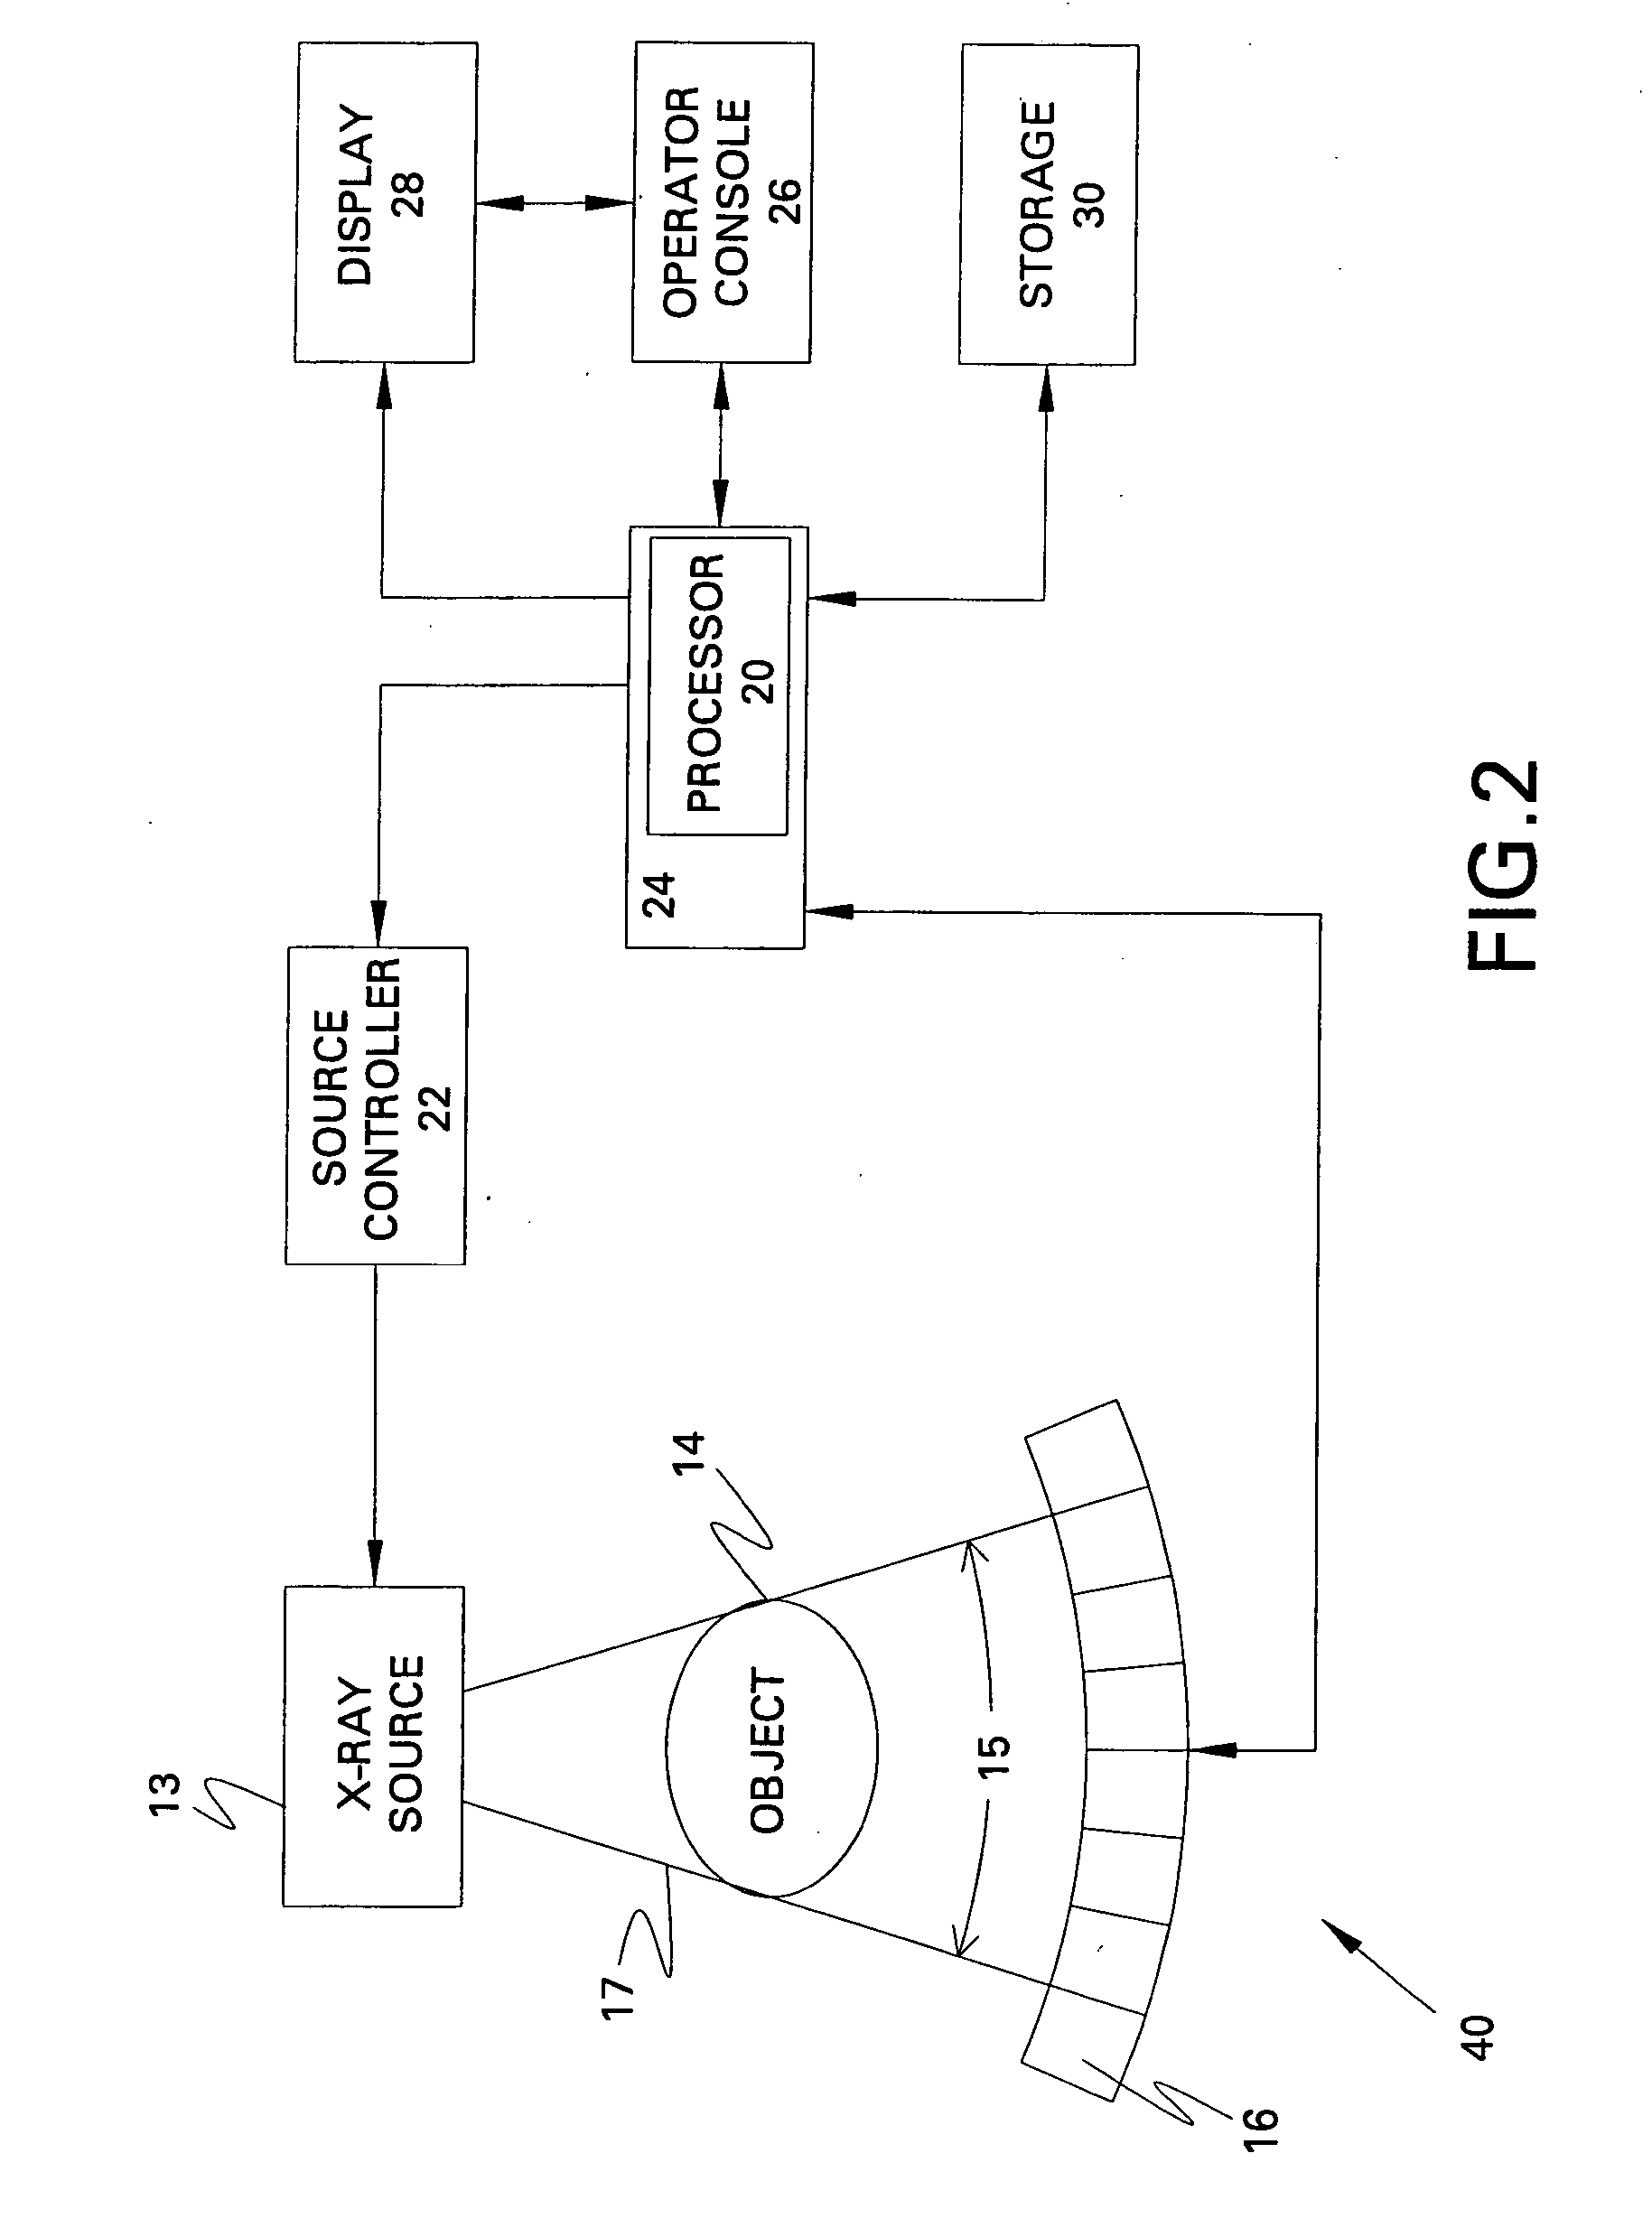 Linear array detector system and inspection method